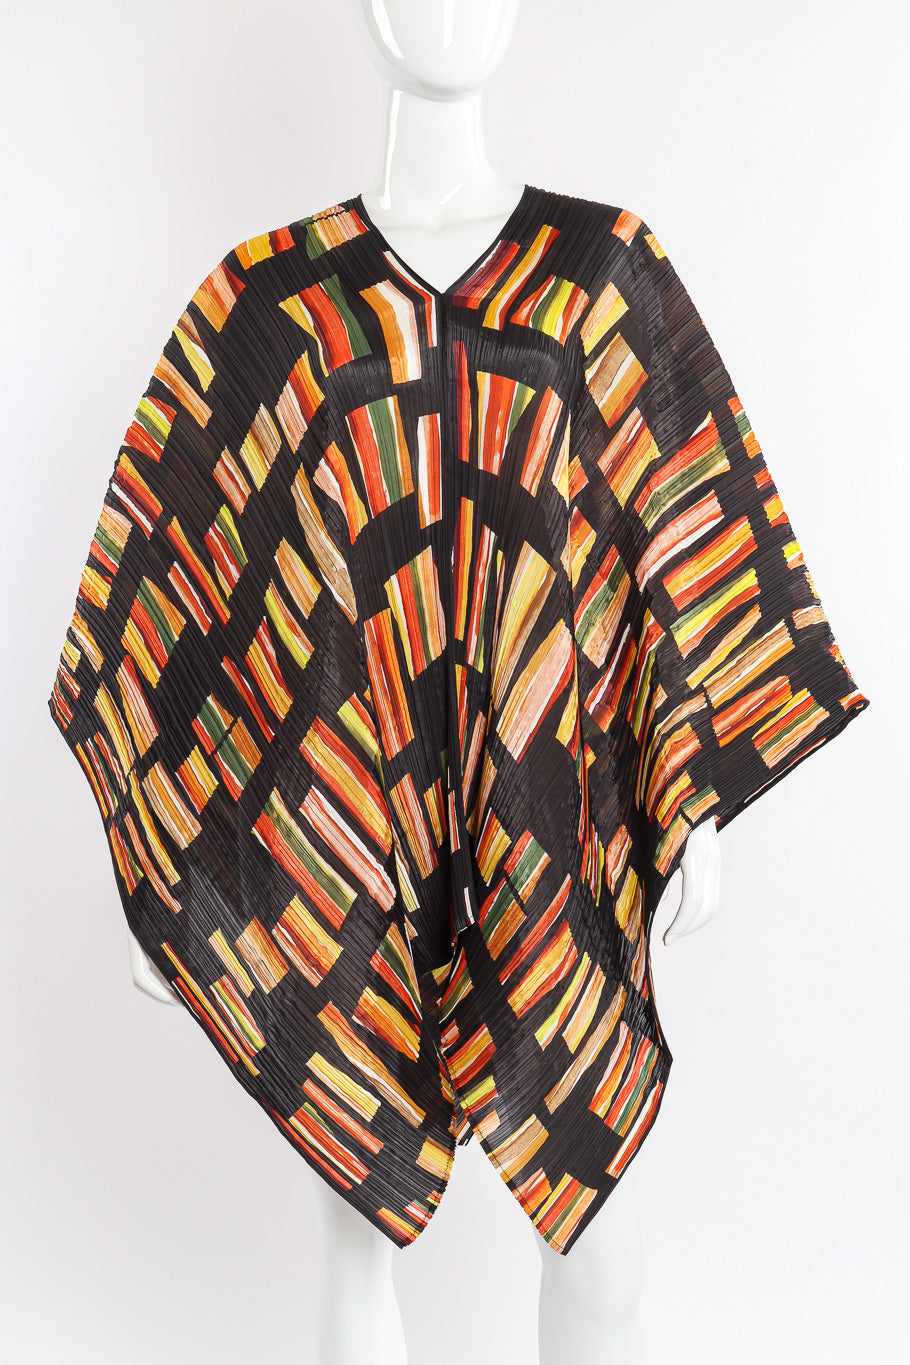 Poncho top by Issey Miyake for Pleats Please on mannequin front @recessla